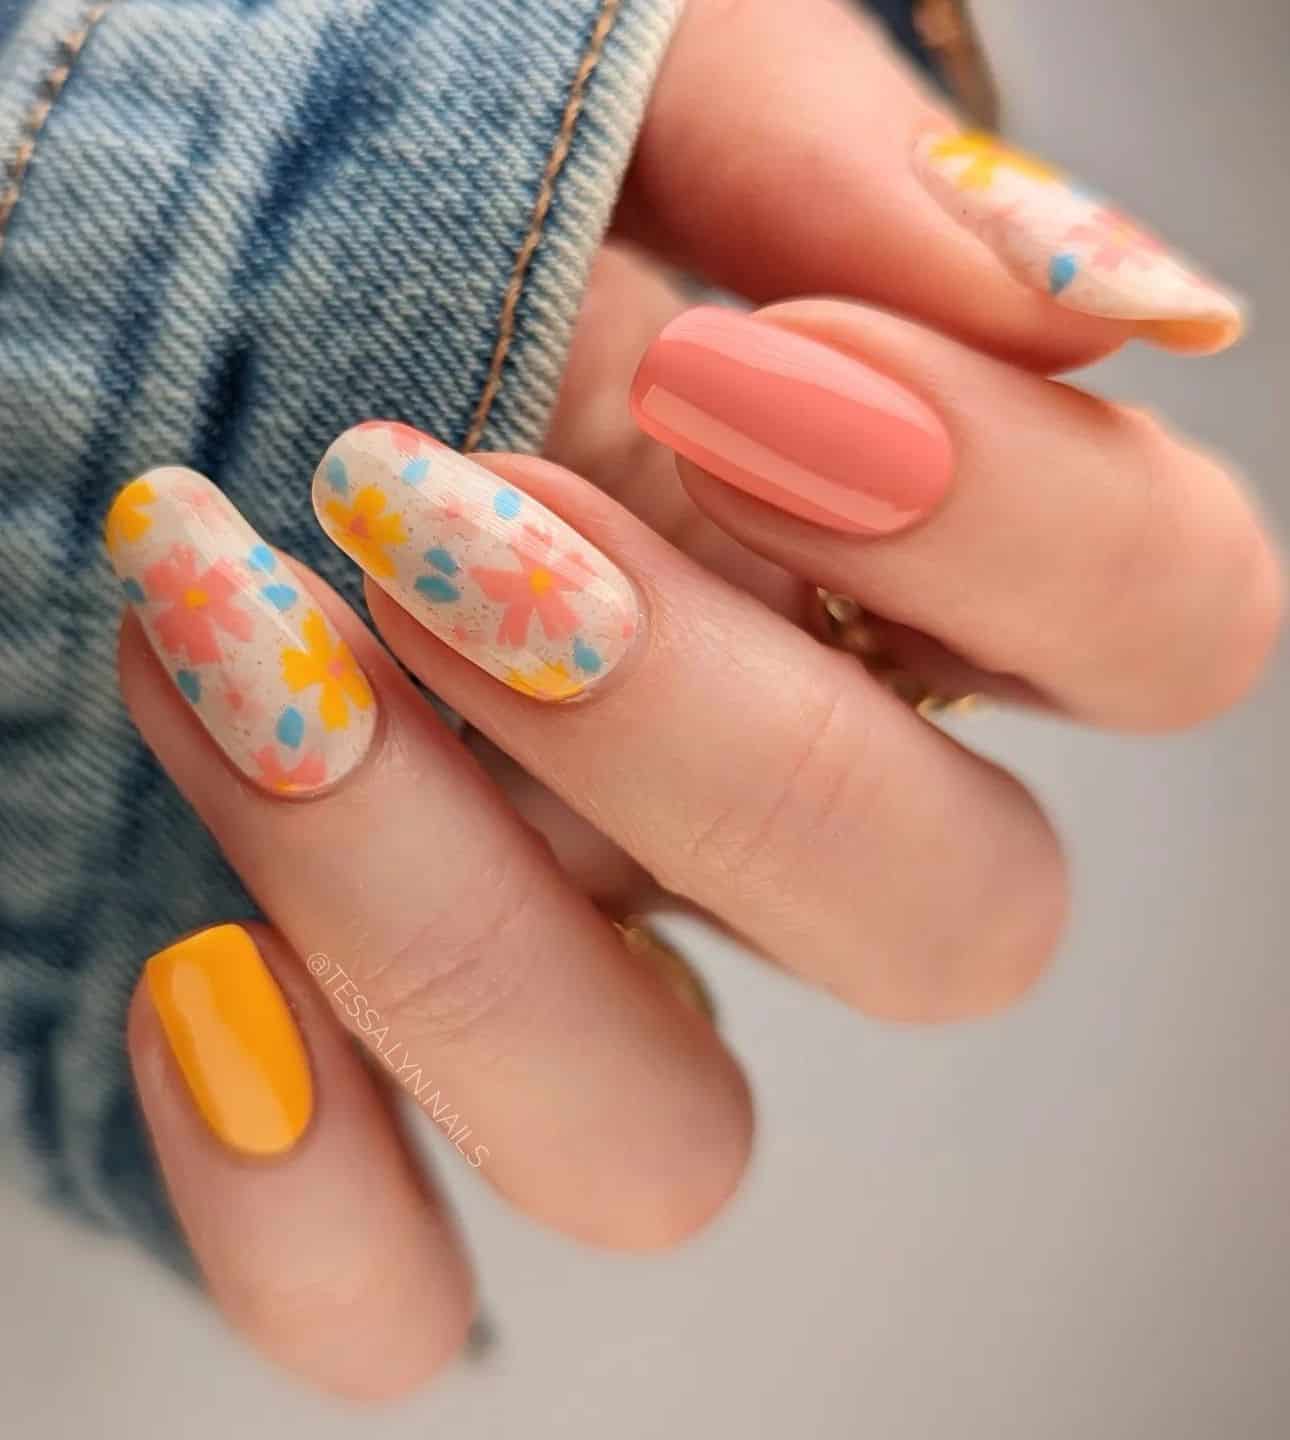 A hand with medium round nails painted with white polish with yellow and coral peach flowers, and two accent nails painted in solid colors